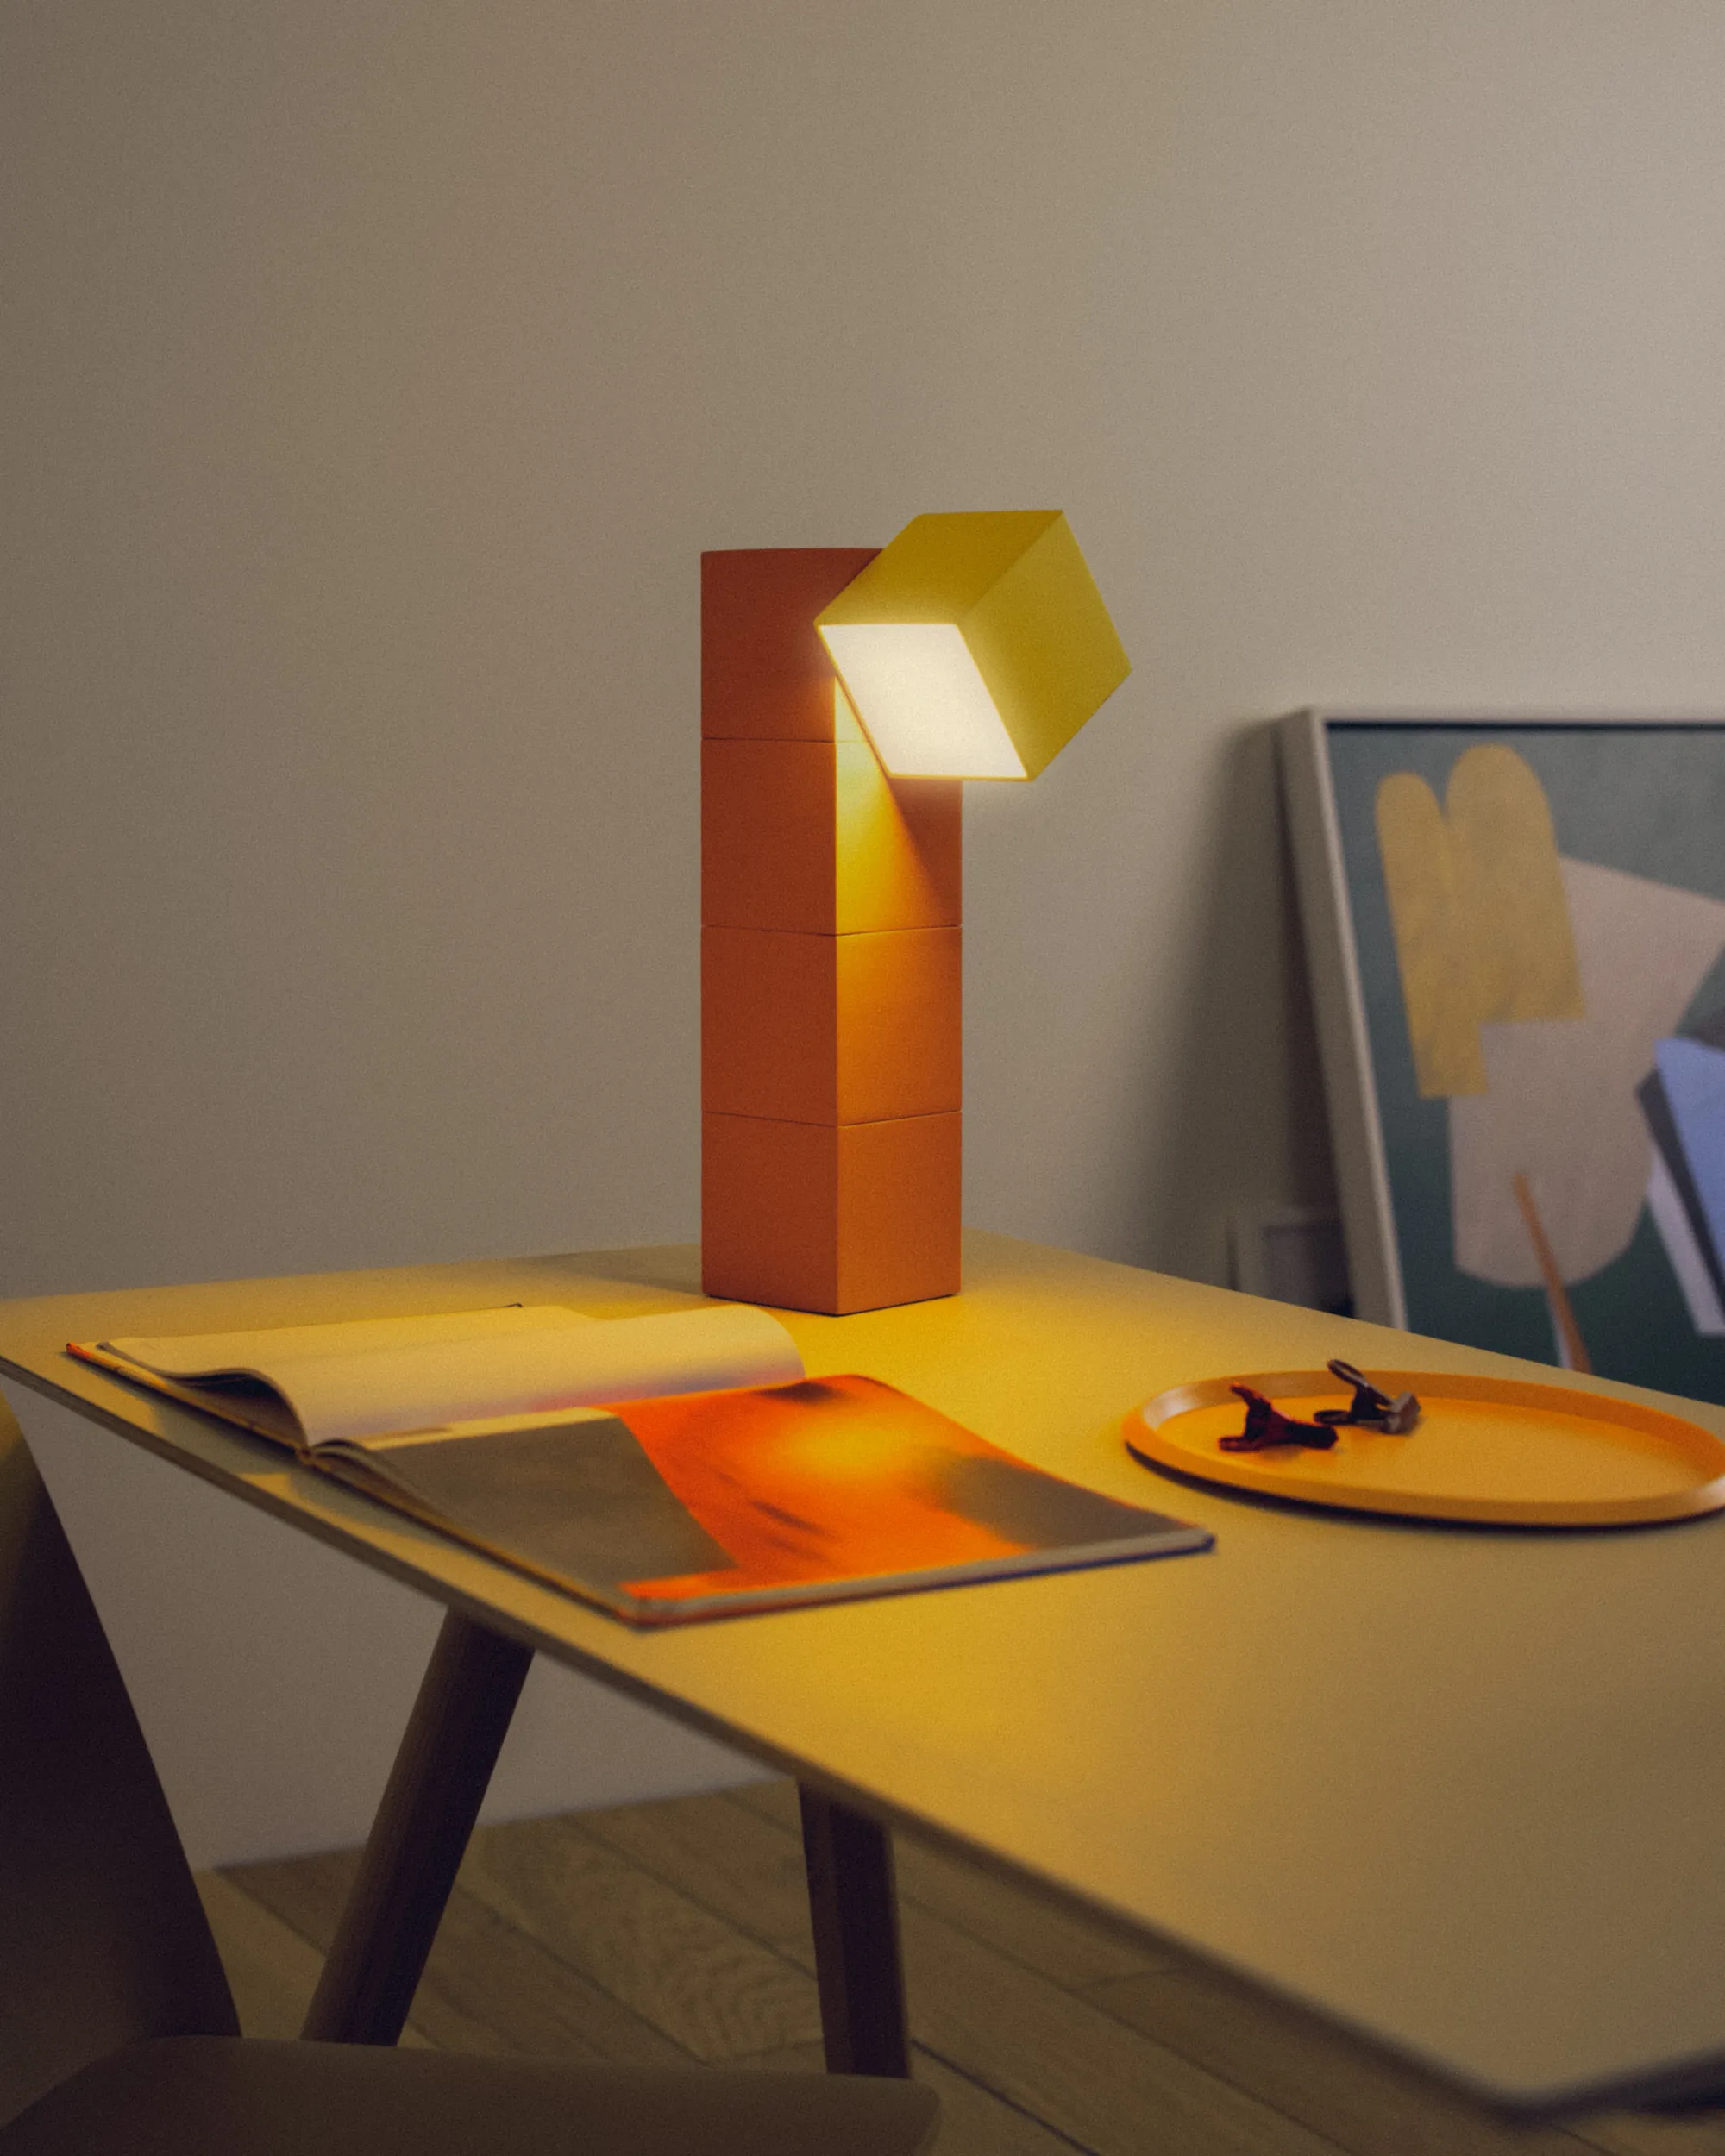 Gantri’s Analog Task Light Table lamp lights up a home office table where a magazine is laid open flat